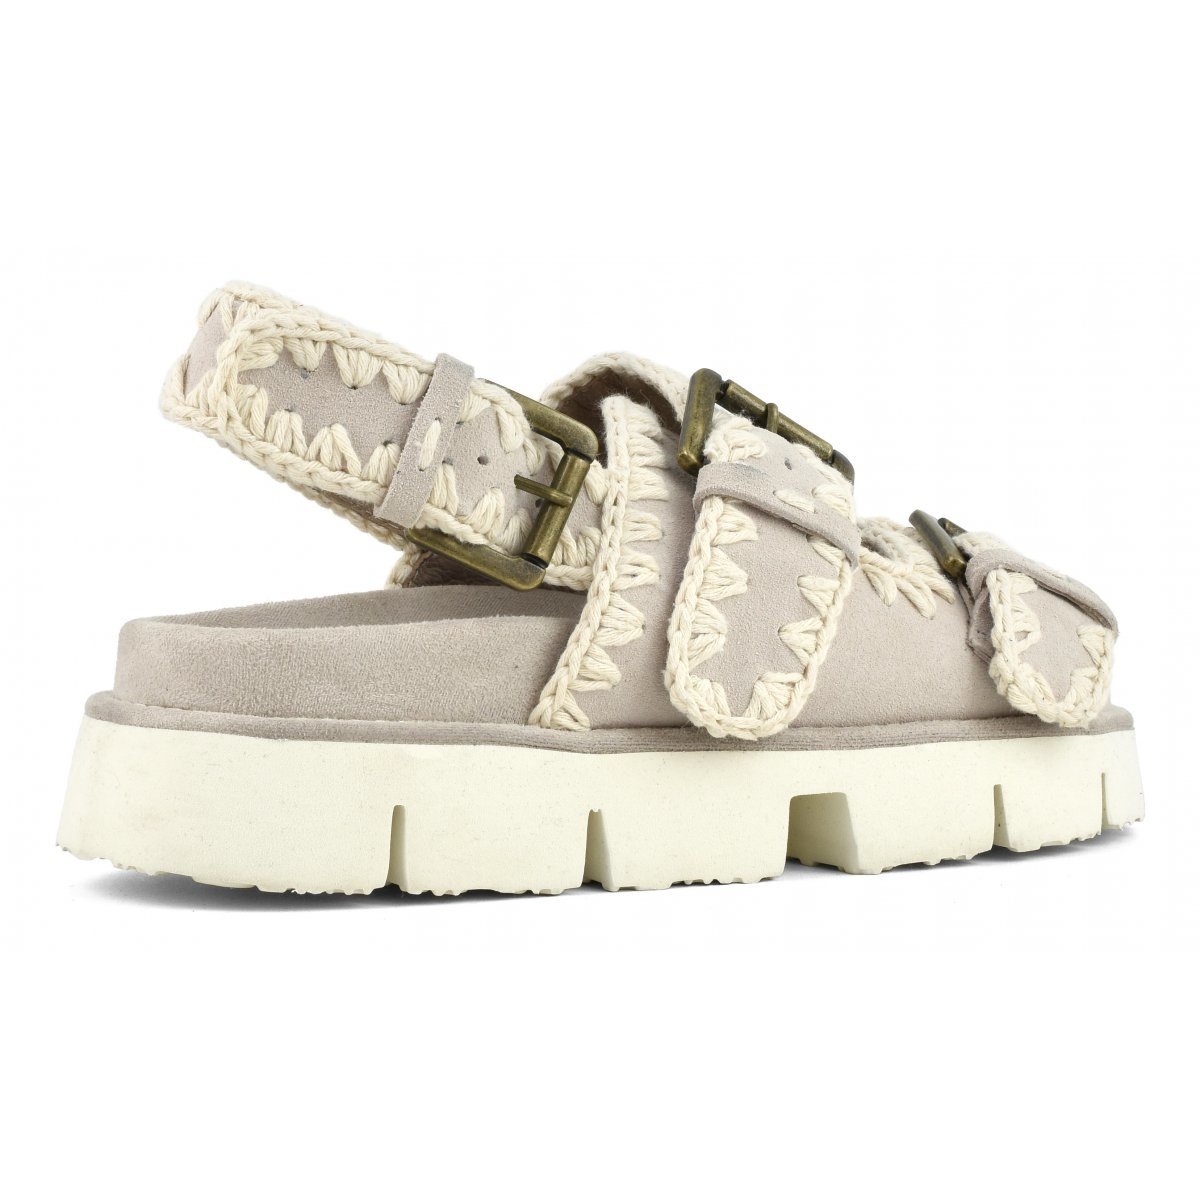 New Sandal With Buckles and Strap - ivory & birch